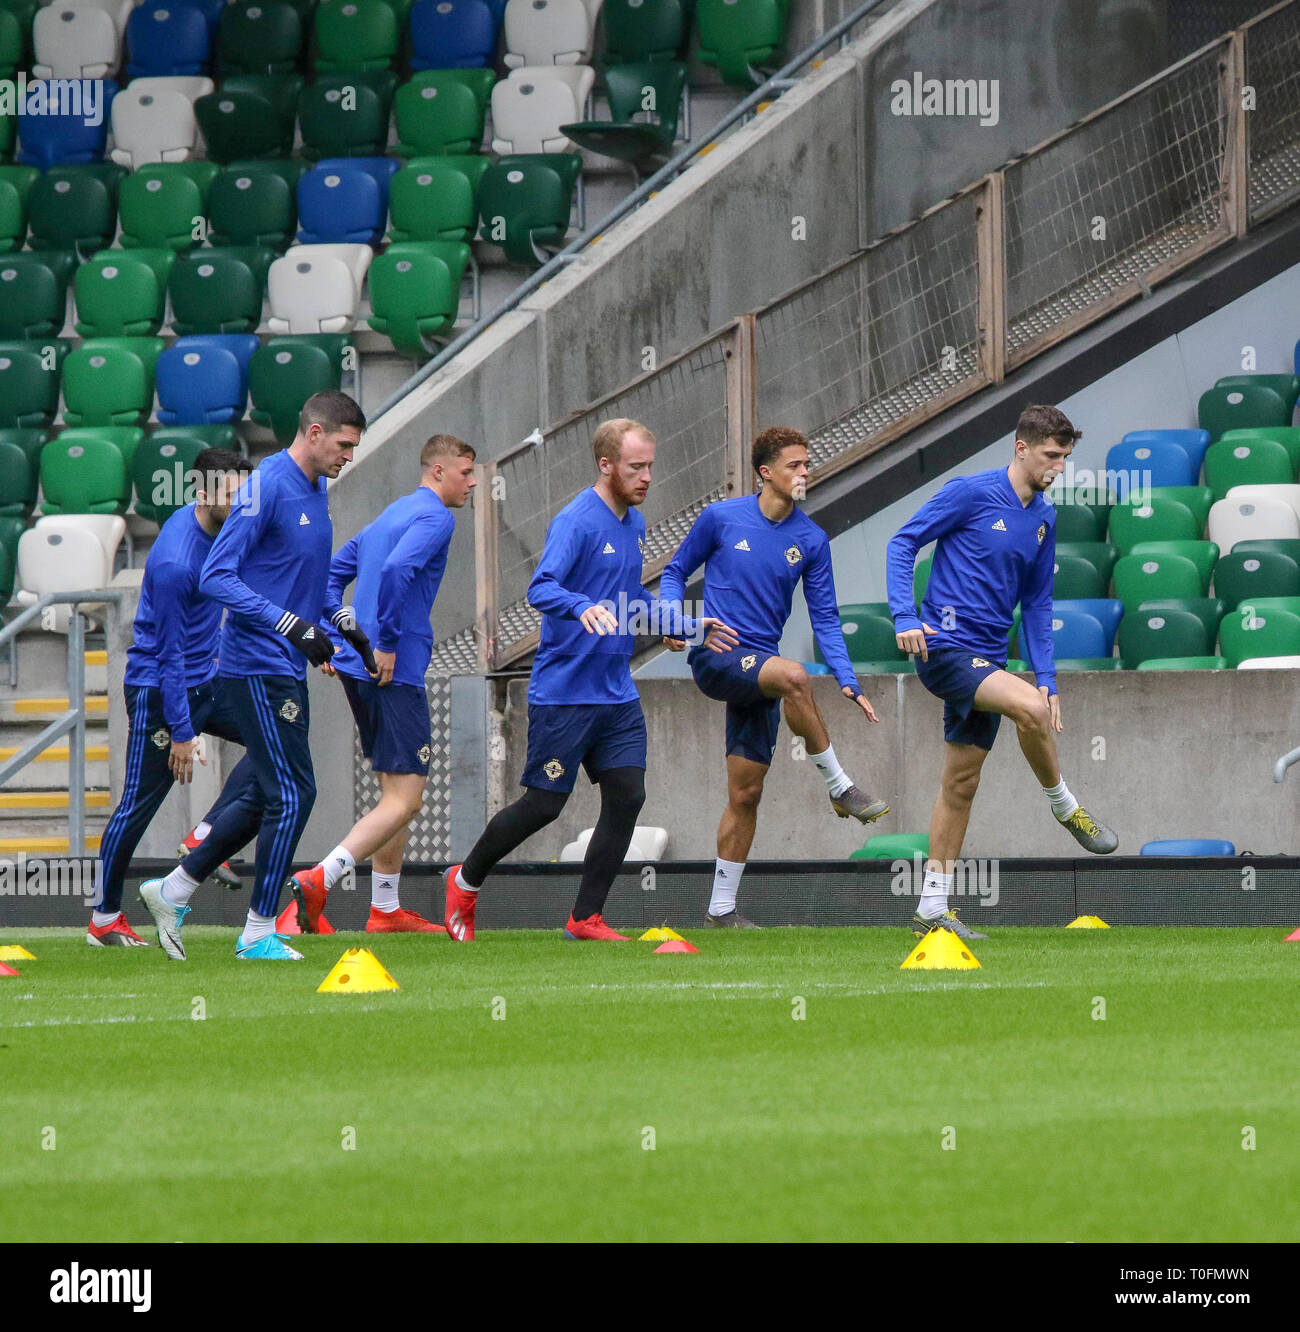 Windsor Park, Belfast, Northern Ireland.20 March 2019. Northern Ireland training in Belfast this morning ahead of their UEFA EURO 2020 Qualifier against Estonia tomorrow night in the stadium.  Craig Cathcart leads this group in training. Credit: David Hunter/Alamy Live News. Stock Photo